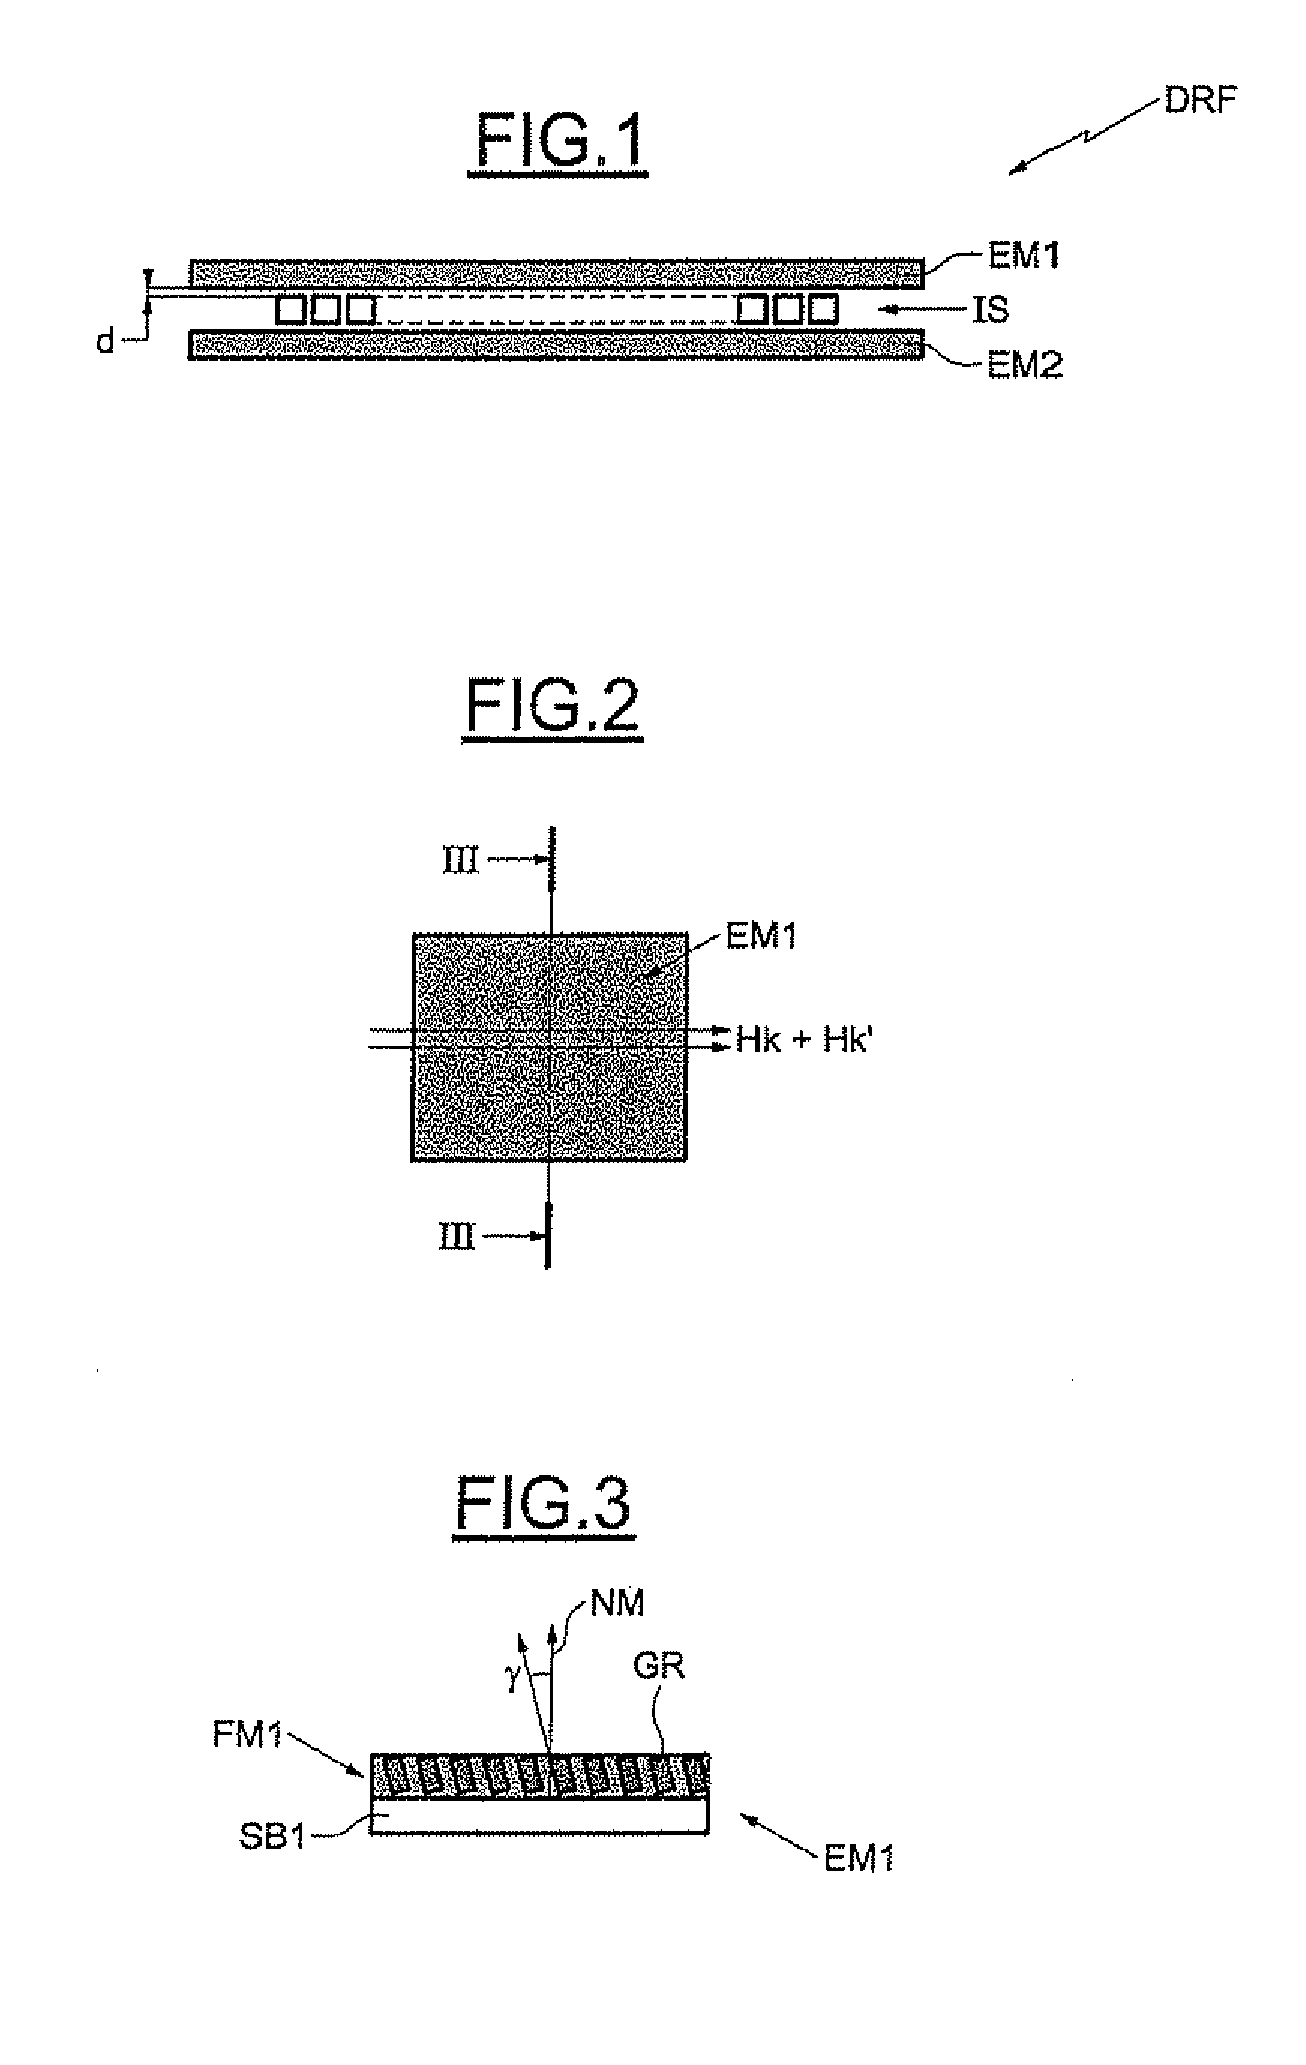 Radio Frequency Device with Magnetic Element, Method for Making Such a Magnetic Element